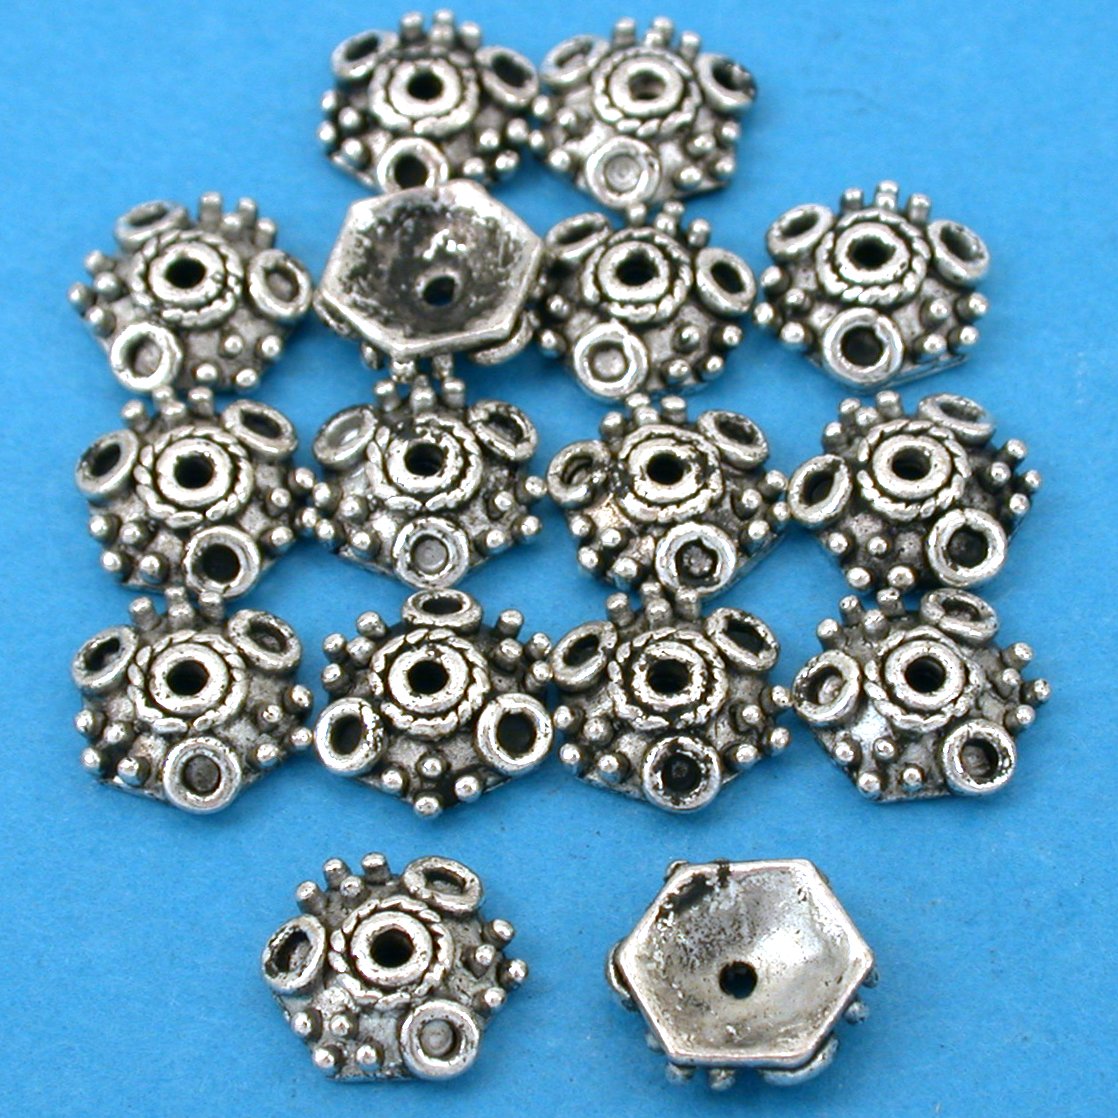 Bali Hex Bead Caps Antique Silver Plated 10.5mm 15 Grams 15Pcs Approx.